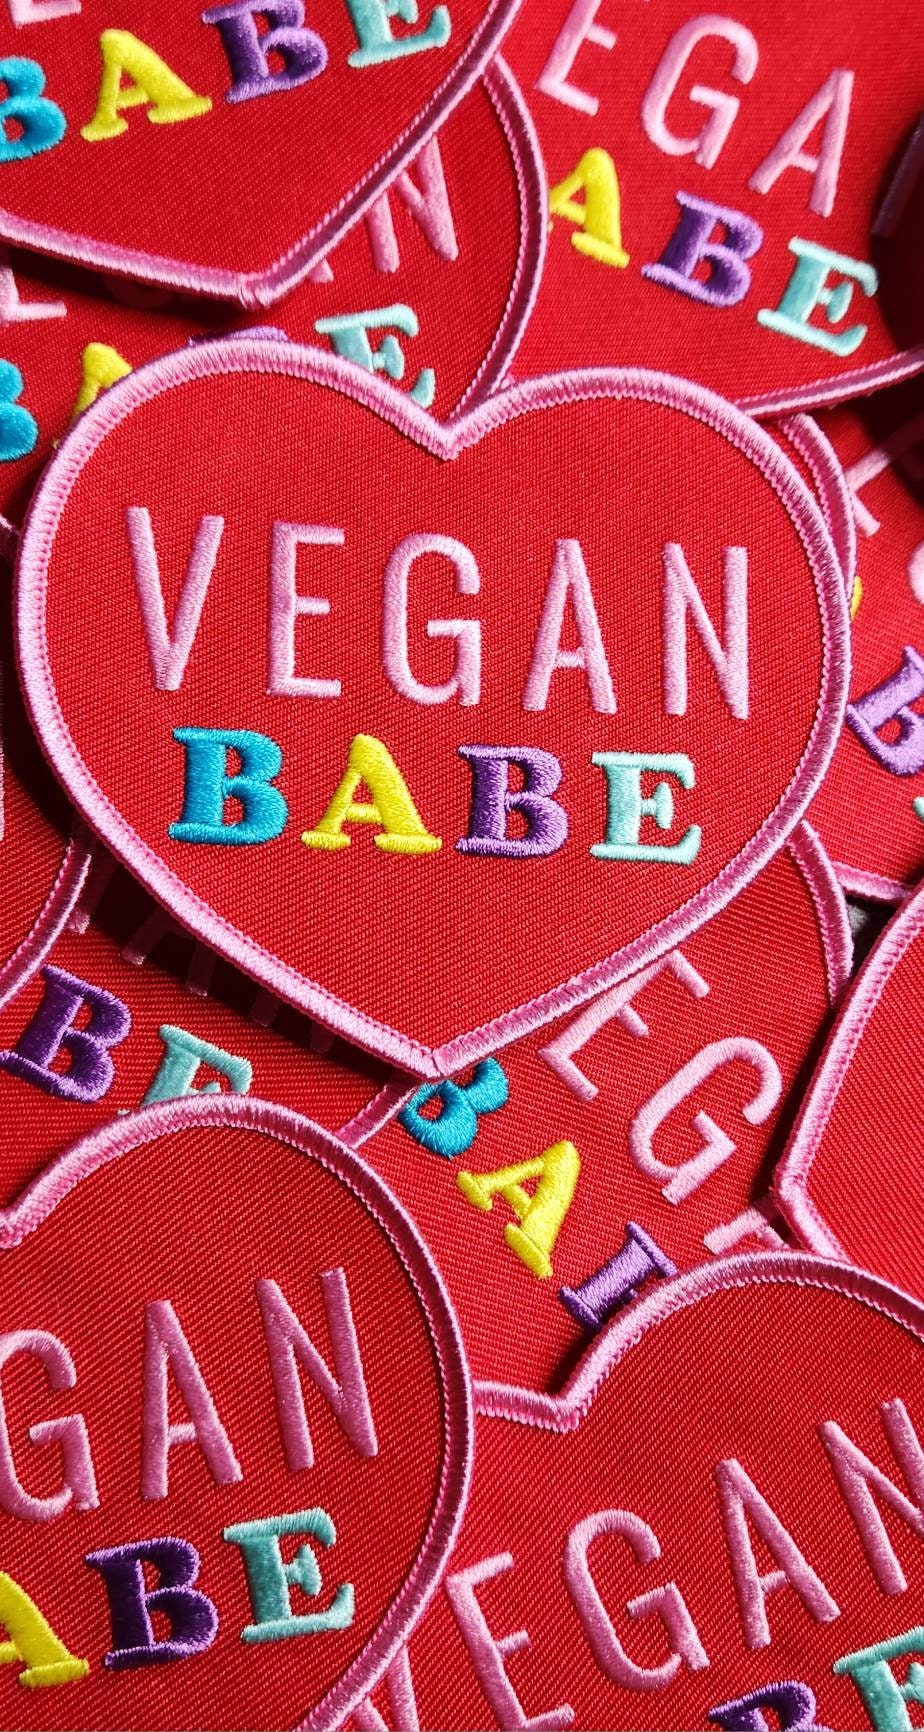 Vegan Collection: New, 1-pc,"Vegan Babe Heart" Popular Patch, Size 3.65" Iron-on Patch, Vegan Gifts, Vibrant Patch for Jackets, DIY Projects